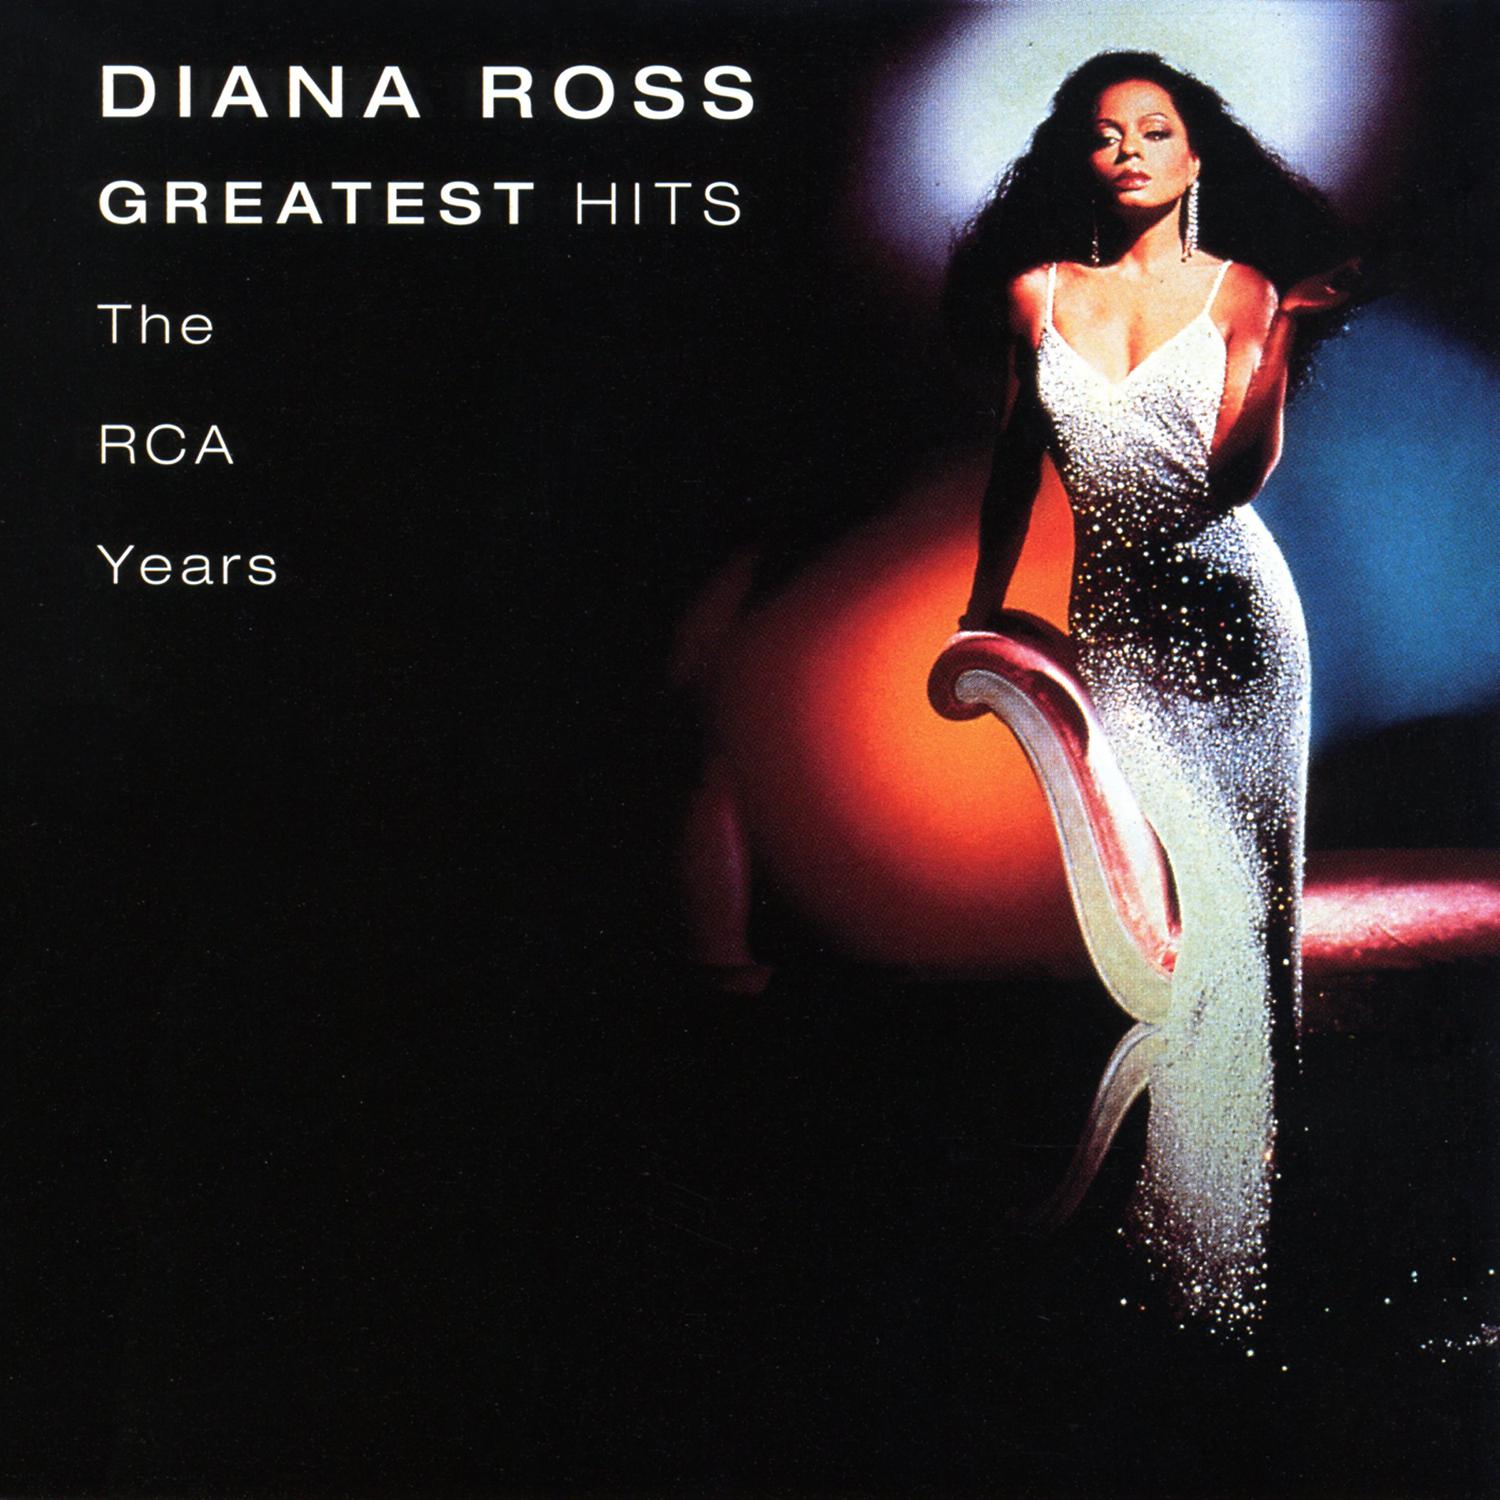 Diana Ross – Greatest Hits: The RCA Years (1997/2015) [Official Digital Download 24bit/96kHz]